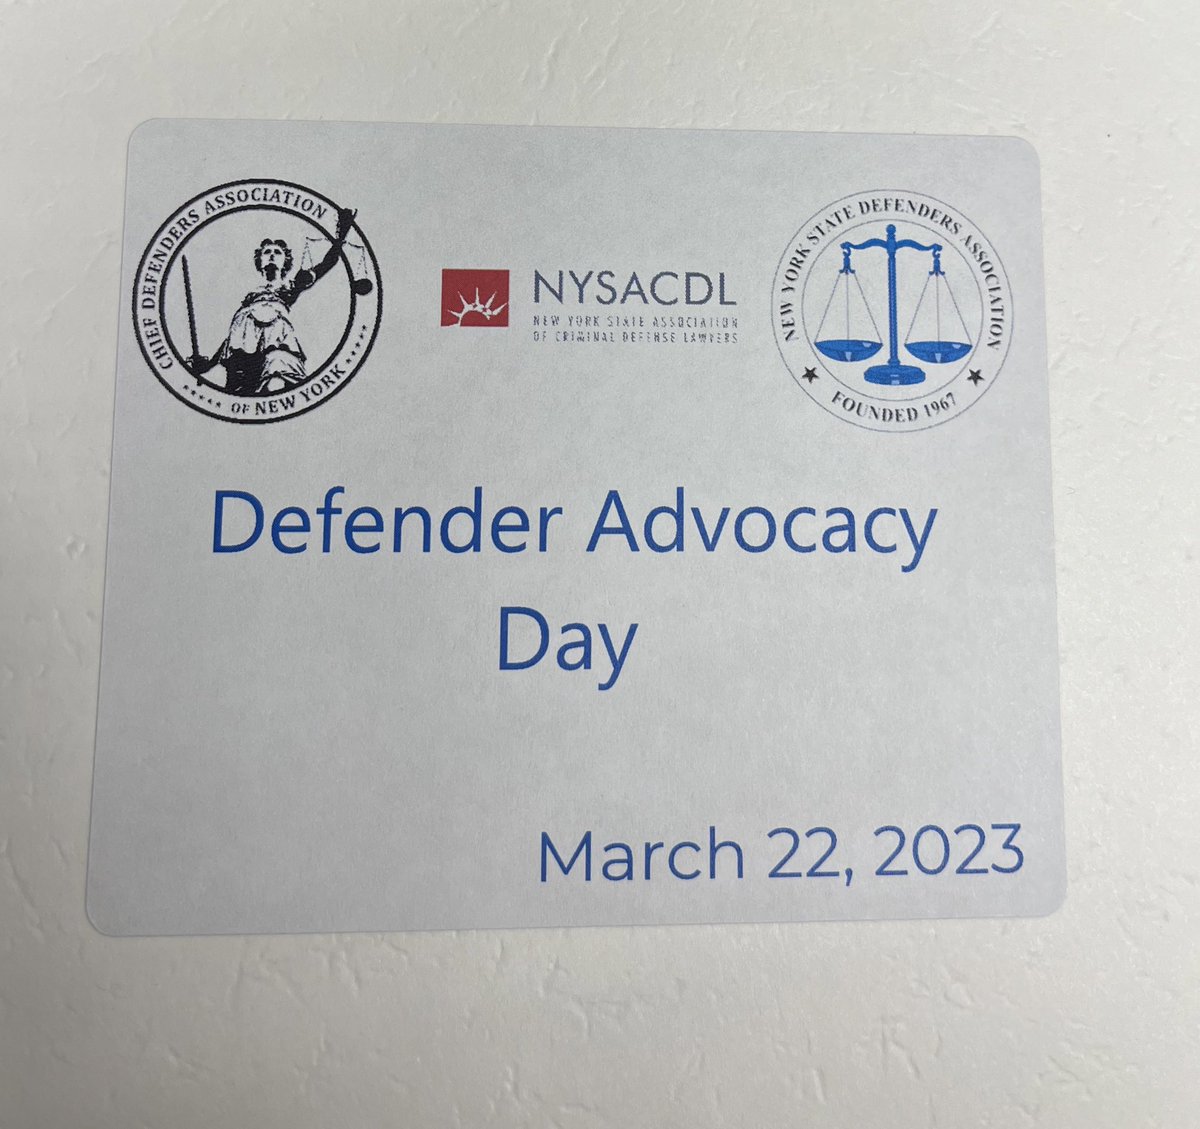 Defender Advocacy Day with @chiefdefendsNY @NYSACDL Defenders need funding for discovery, family defense representation, recruitment and retention #gideonat60